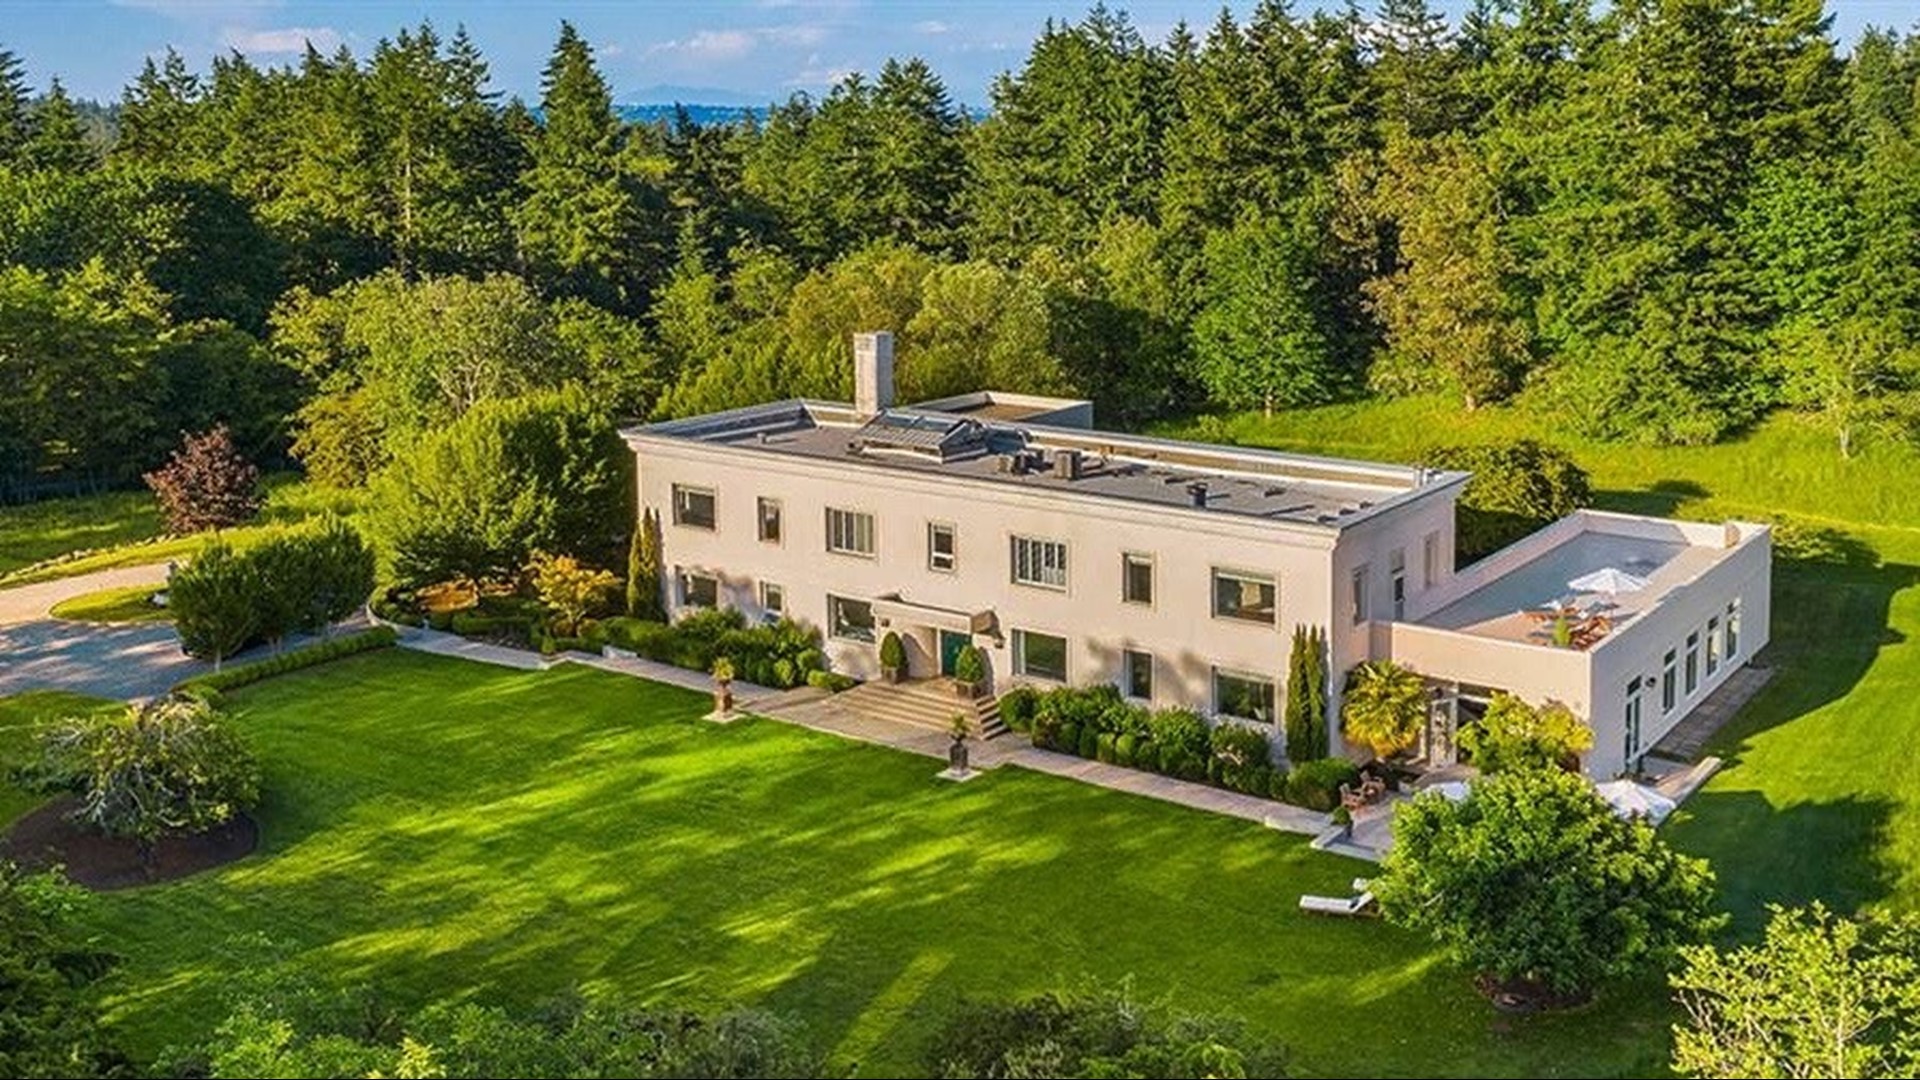 Built during wartime, this home could be your peaceful retreat.